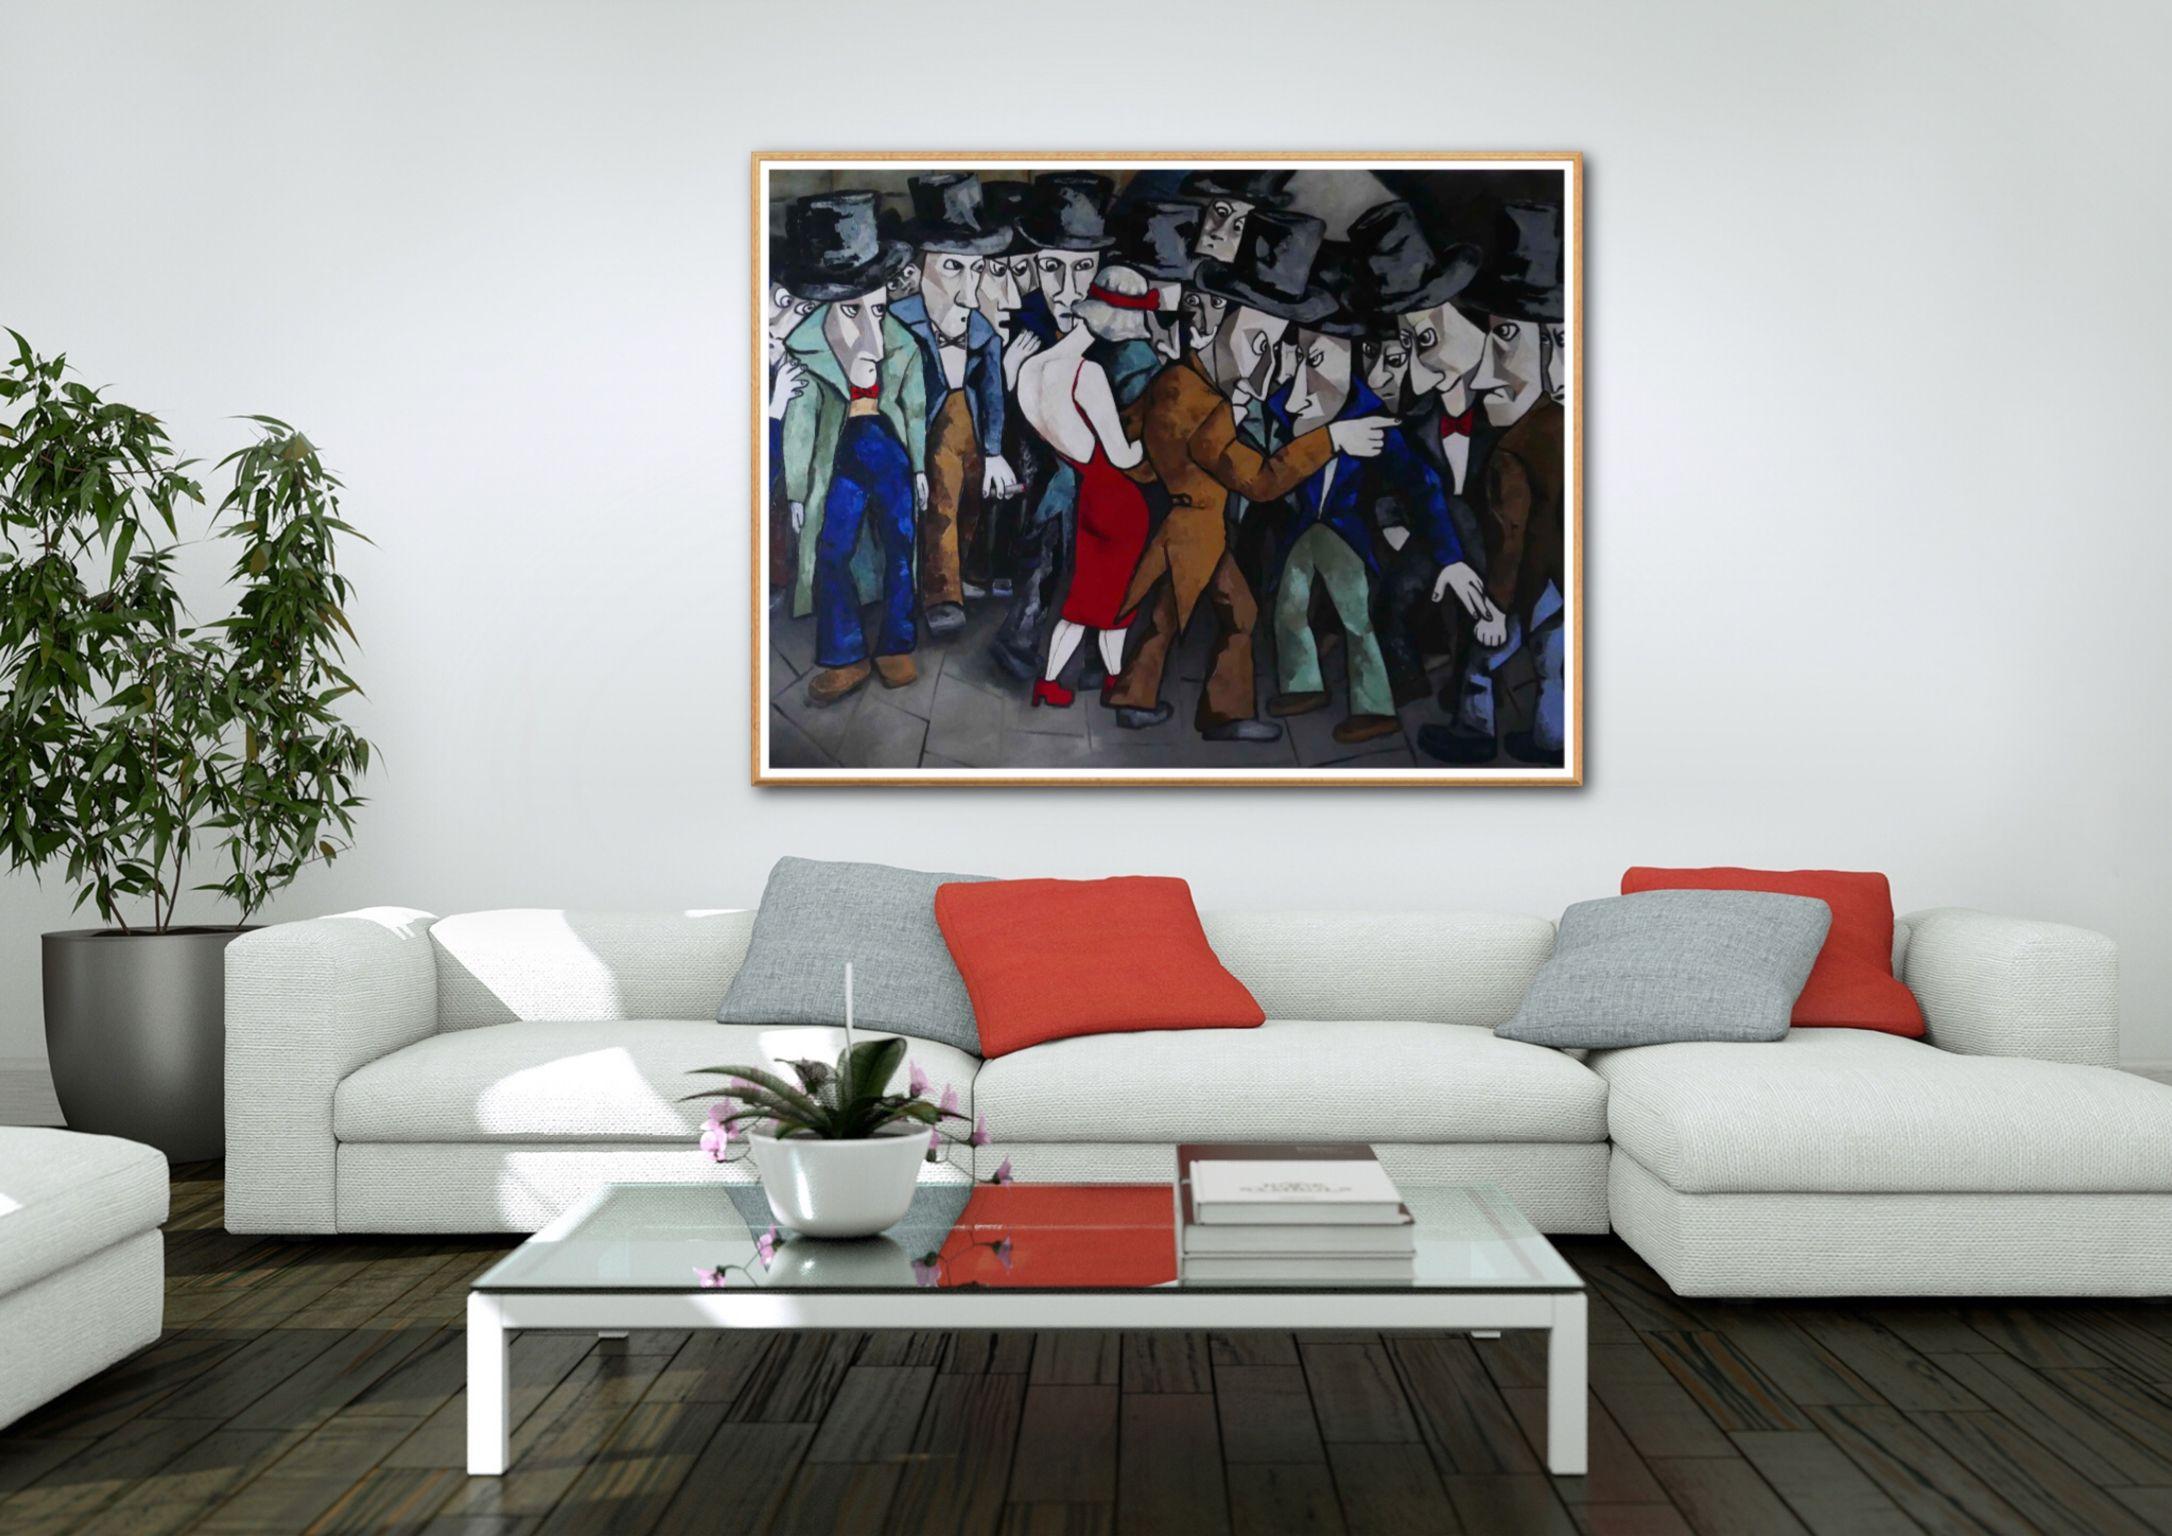 Top hat & tails gang with lady in red, Painting, Oil on Canvas 3